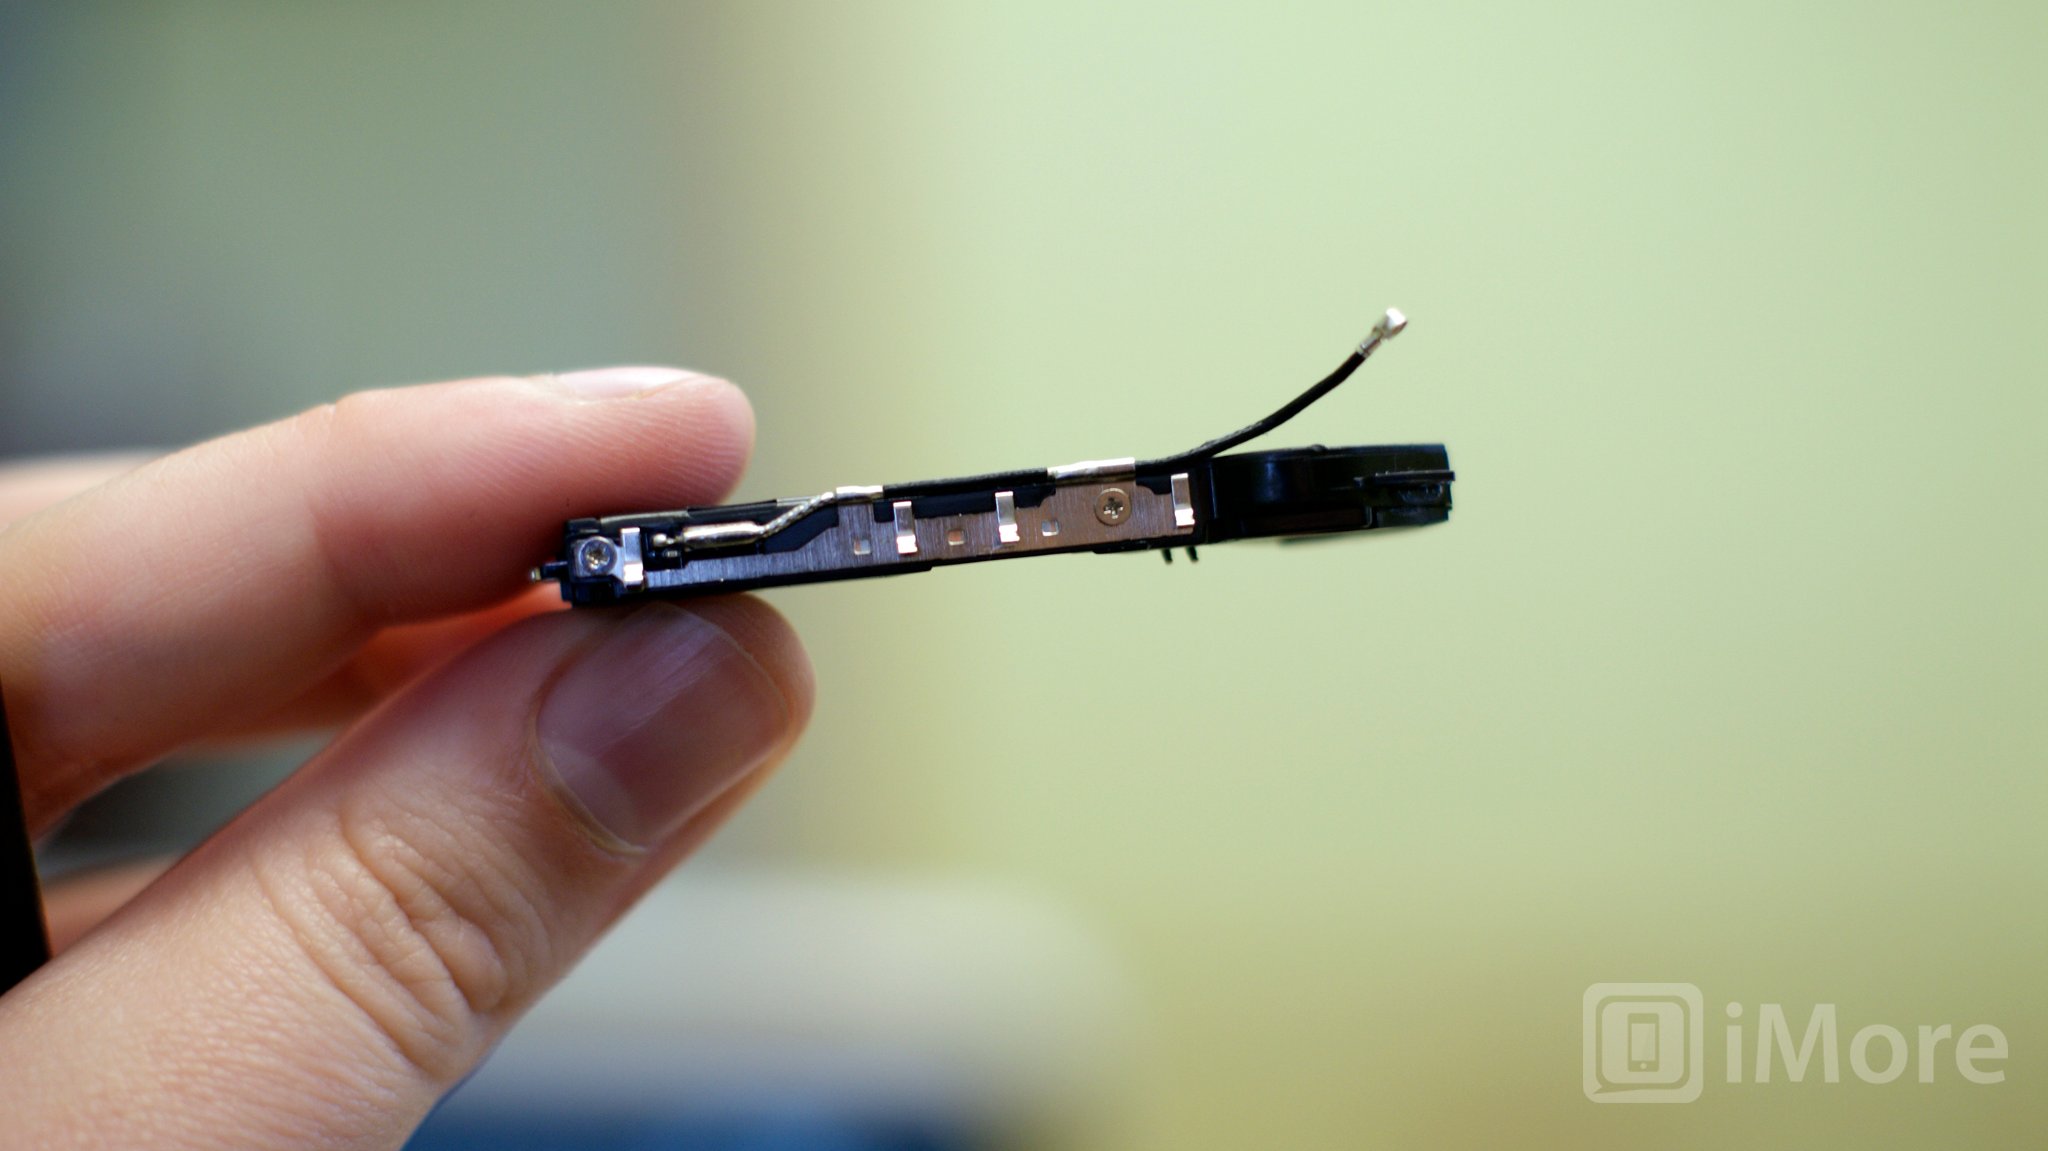 How to replace the cellular antenna on a GSM iPhone 4